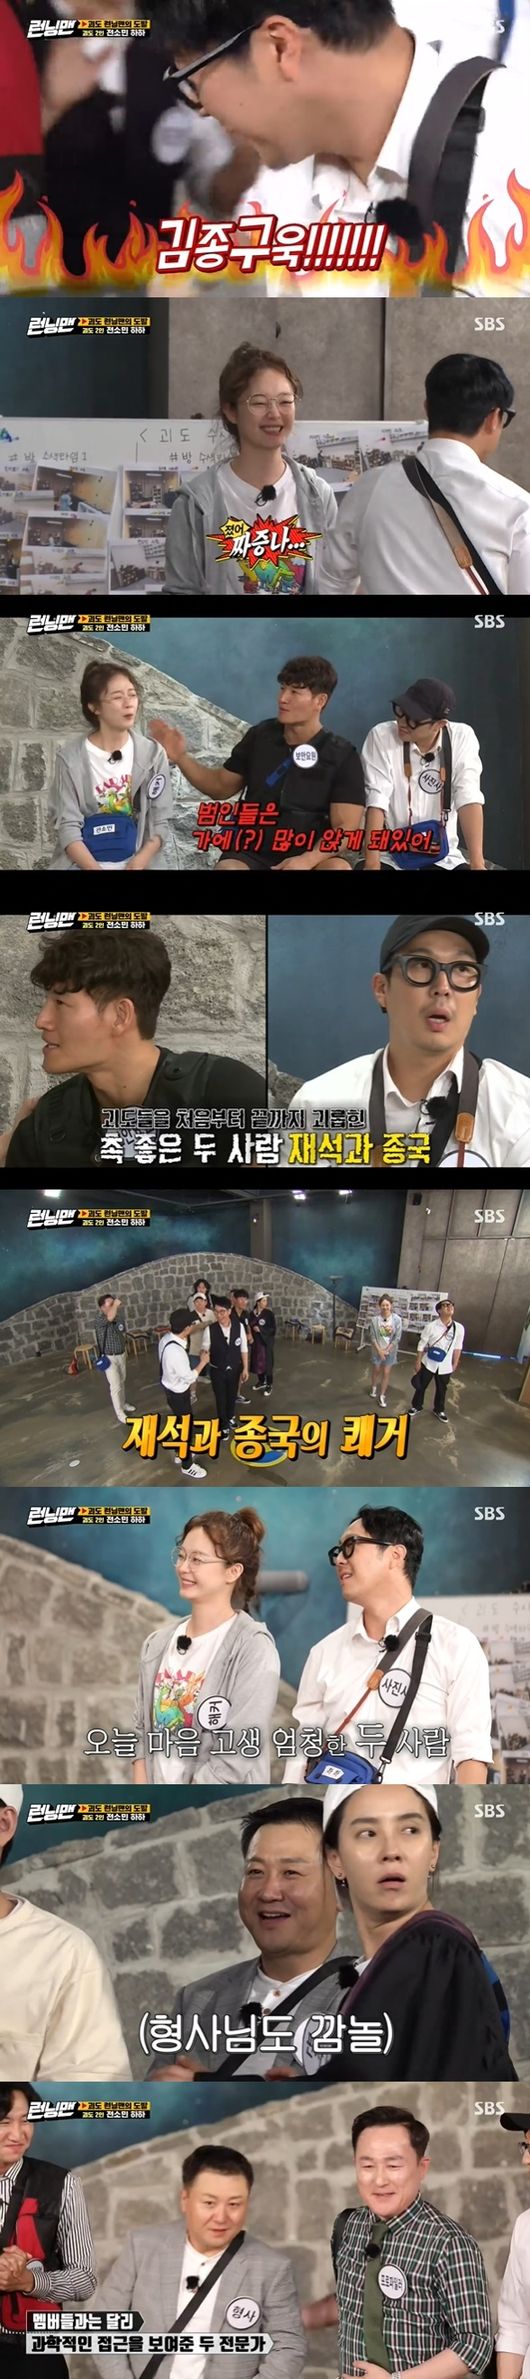 Yoo Jae-Suk and Kim Jong-kook arrested the two-member gangsters Jeon So-min and Haha with a ghostly tact.SBS Running Man, which was broadcasted on the afternoon of the 6th, was decorated with the second Provocative of the Goose Running Man, and the first generation Profiler Pyo Chang-won and the actual model of the movie Crime City Ma Dong Seok appeared as guests.The members of Running Man played Choices in their respective roles in the order they arrived first, while Jeon So-min was Anonymous, Yang Se-chan was the audio director, and Haha was J.A.Martin Photographer, Yoo Jae-Suk was the prosecutor, Lee Kwang-soo was the interior expert, Ji Seok-jin was the head hunter, Kim Jong-kook was the security guard, and Song Ji-hyo was the judge.With Detective and Profiler remaining, Major General Pyo Chang-won and Lieutenant Yoon Seok-ho appeared.When Profiler and Detective appeared in the entertainment program, the members were surprised and could not shut up. Above all, Lieutenant Yoon Seok-ho said, I was honestly worried about appearing because I did not have any words.But it is really hard to come out. All 10 members of Running Man and guests are candidates for the gangster, and the existence of the gangster can be confirmed through voting.The most votes among the candidates should be Choicesed to The Suspect of the trial, and the two candidates should be arrested.Profiler Pyo Chang-won said, If it is a gangster, it is a good job to steal, a good job to hide your identity.And it is a job that can confuse the ruling, and it seems that two people have been Choices for a job without overlapping. Lee Kwang-soo was convinced that I am 100% caught today. Prosecutor Yoo Jae-Suk is J.A. at trialMartin Photographer Haha and Anonymous Jeon So-min were chosen as the two Suspects.In fact, there was a mass in this, narrowing the siege network.After finishing the second room, Yoon Seok-ho Detective speculated that someone had moved the jewels from the room A, saying, My bag is heavy, this is fun.I think senior Pyo Chang-won is opening this up, he said, adding that Pyo Chang-won denied it absolutely not and confused the surroundings.The most-voted voter in the second trial, Jeon So-min, was decided to be The Suspect, and it was actually a goose.Yoo Jae-Suk finished the final room Caught in the Web and said, Ill ask you one last thing: Who was the last person in the B room?The only person who has been in room B is Haha. There is no Haha in this picture, he said.Several The Suspects were nominated in the final trial, but Haha, who was suspected by Yoo Jae-Suk and Kim Jong-kook to the end, was on trial.Hahas identity was a go-to, and failed to commission, shouting Kim Jong-kook!!!! irritating.The final winners were delighted, and Yoo Jae-Suk laughed, saying, You said yes.Running Man screen captures